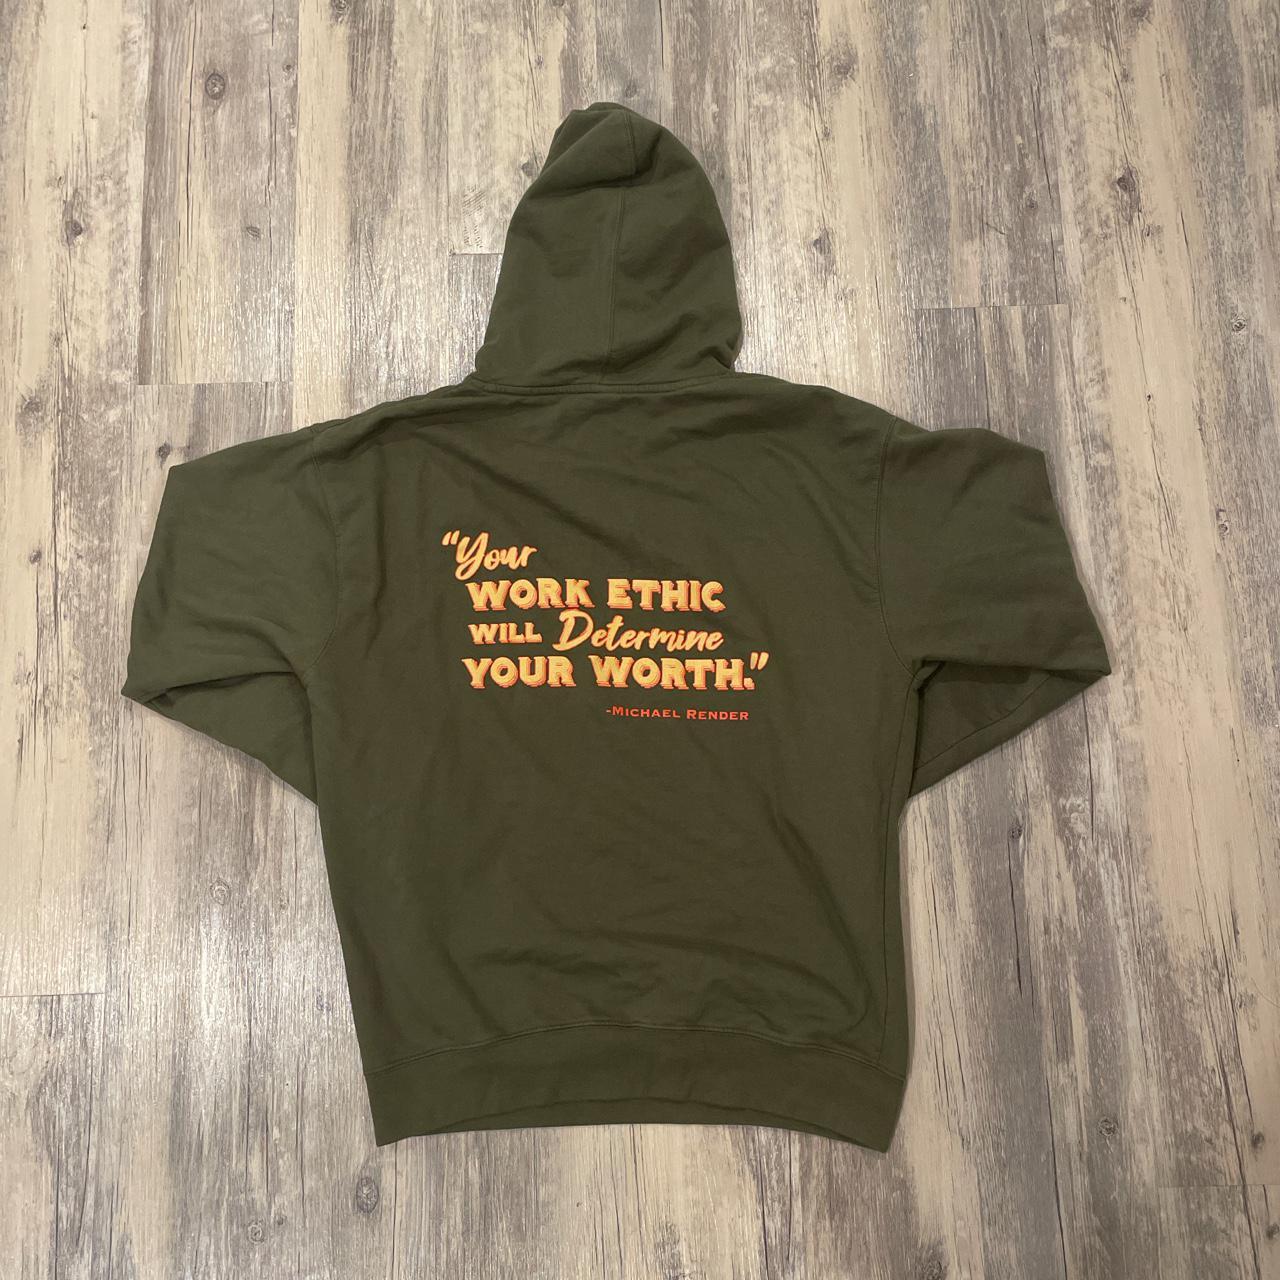 Product Image 2 - Olive green hoodie
Size: Large (